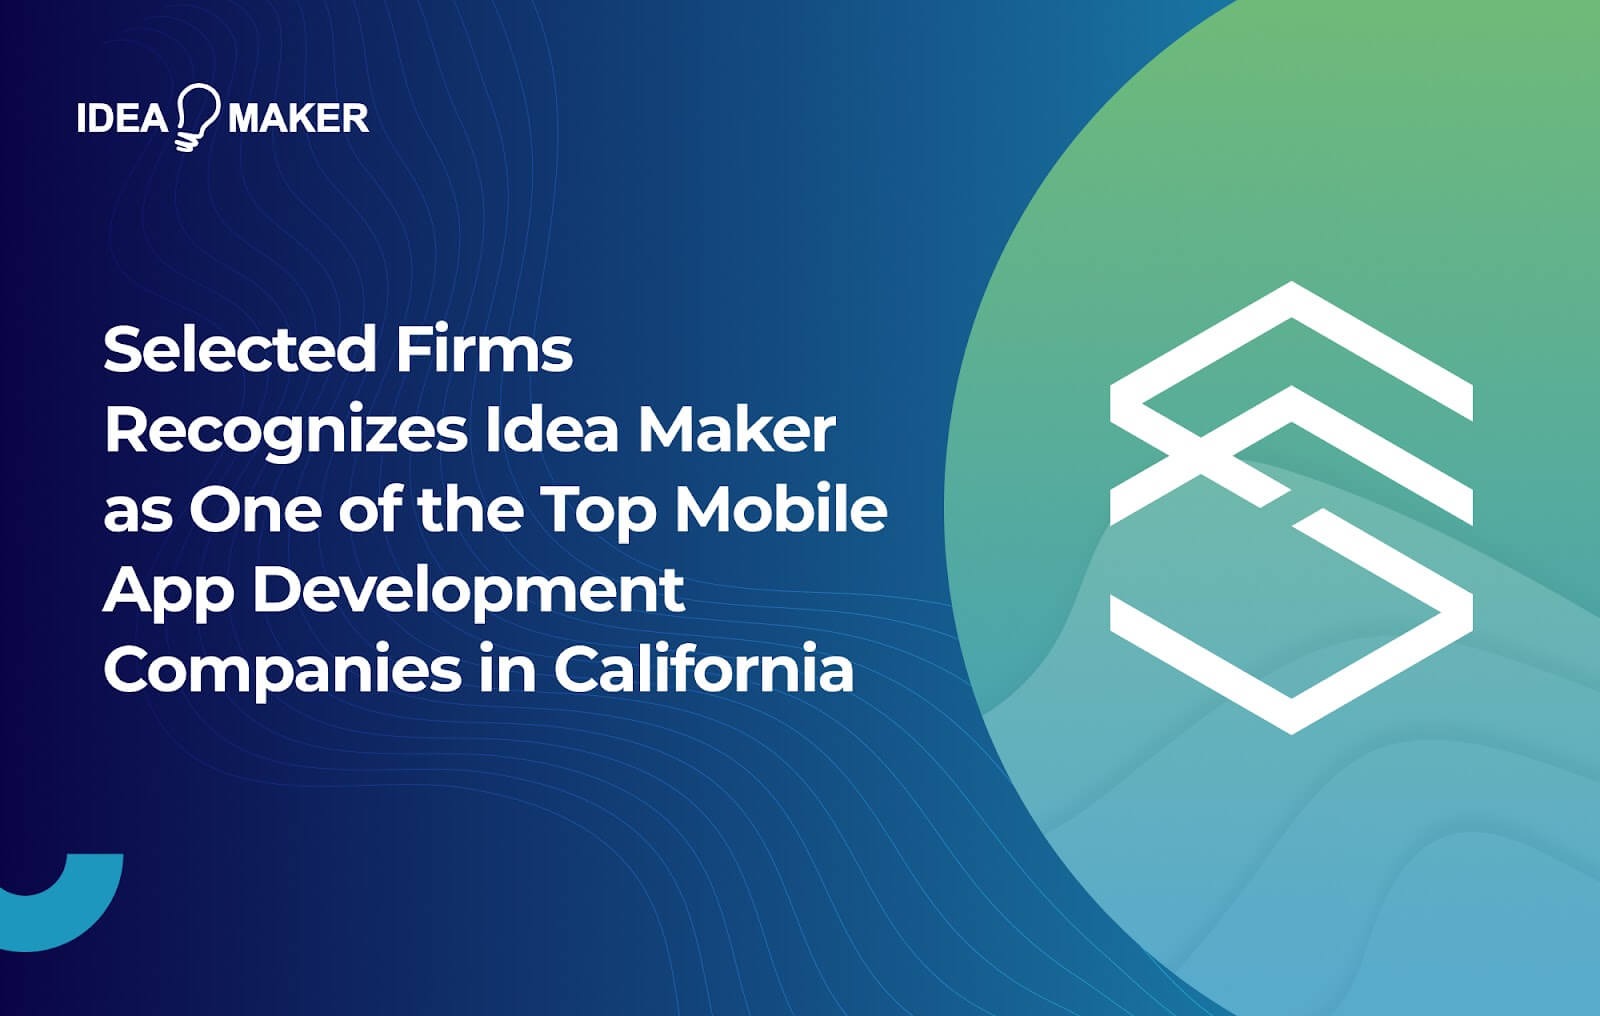 Selected Firms Recognizes Idea Maker as One of the Top Web Design Companies in California